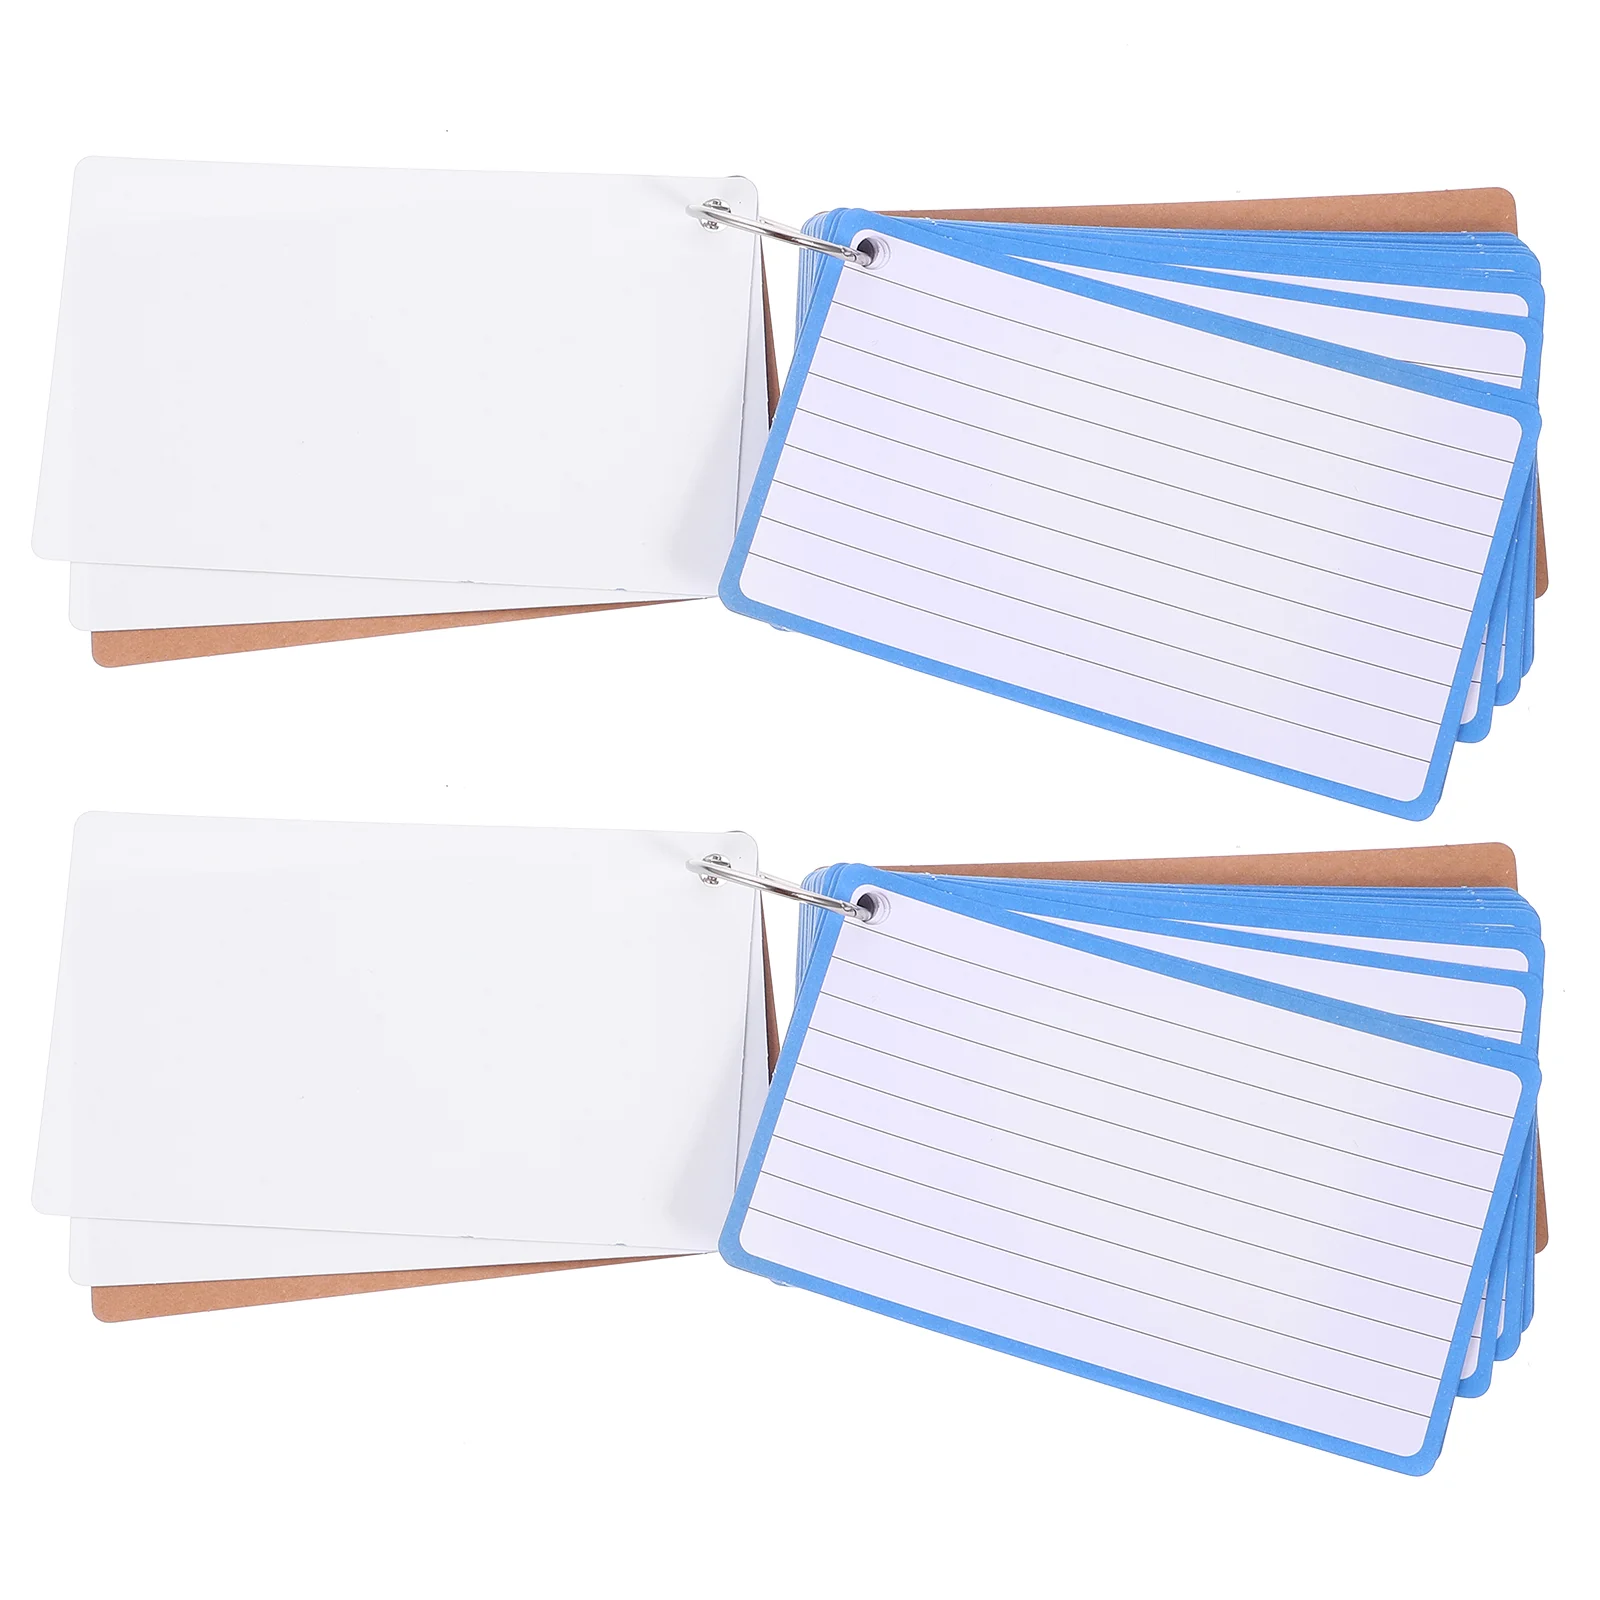 2 Books of Memo Blank Cards Index Cards Lined Cards Diy Graffiti Cards Colored Index Card 20sheet set postcard kraft paper card letter pad diy scarpbooking graffiti greeting cards cardboard student school supplies